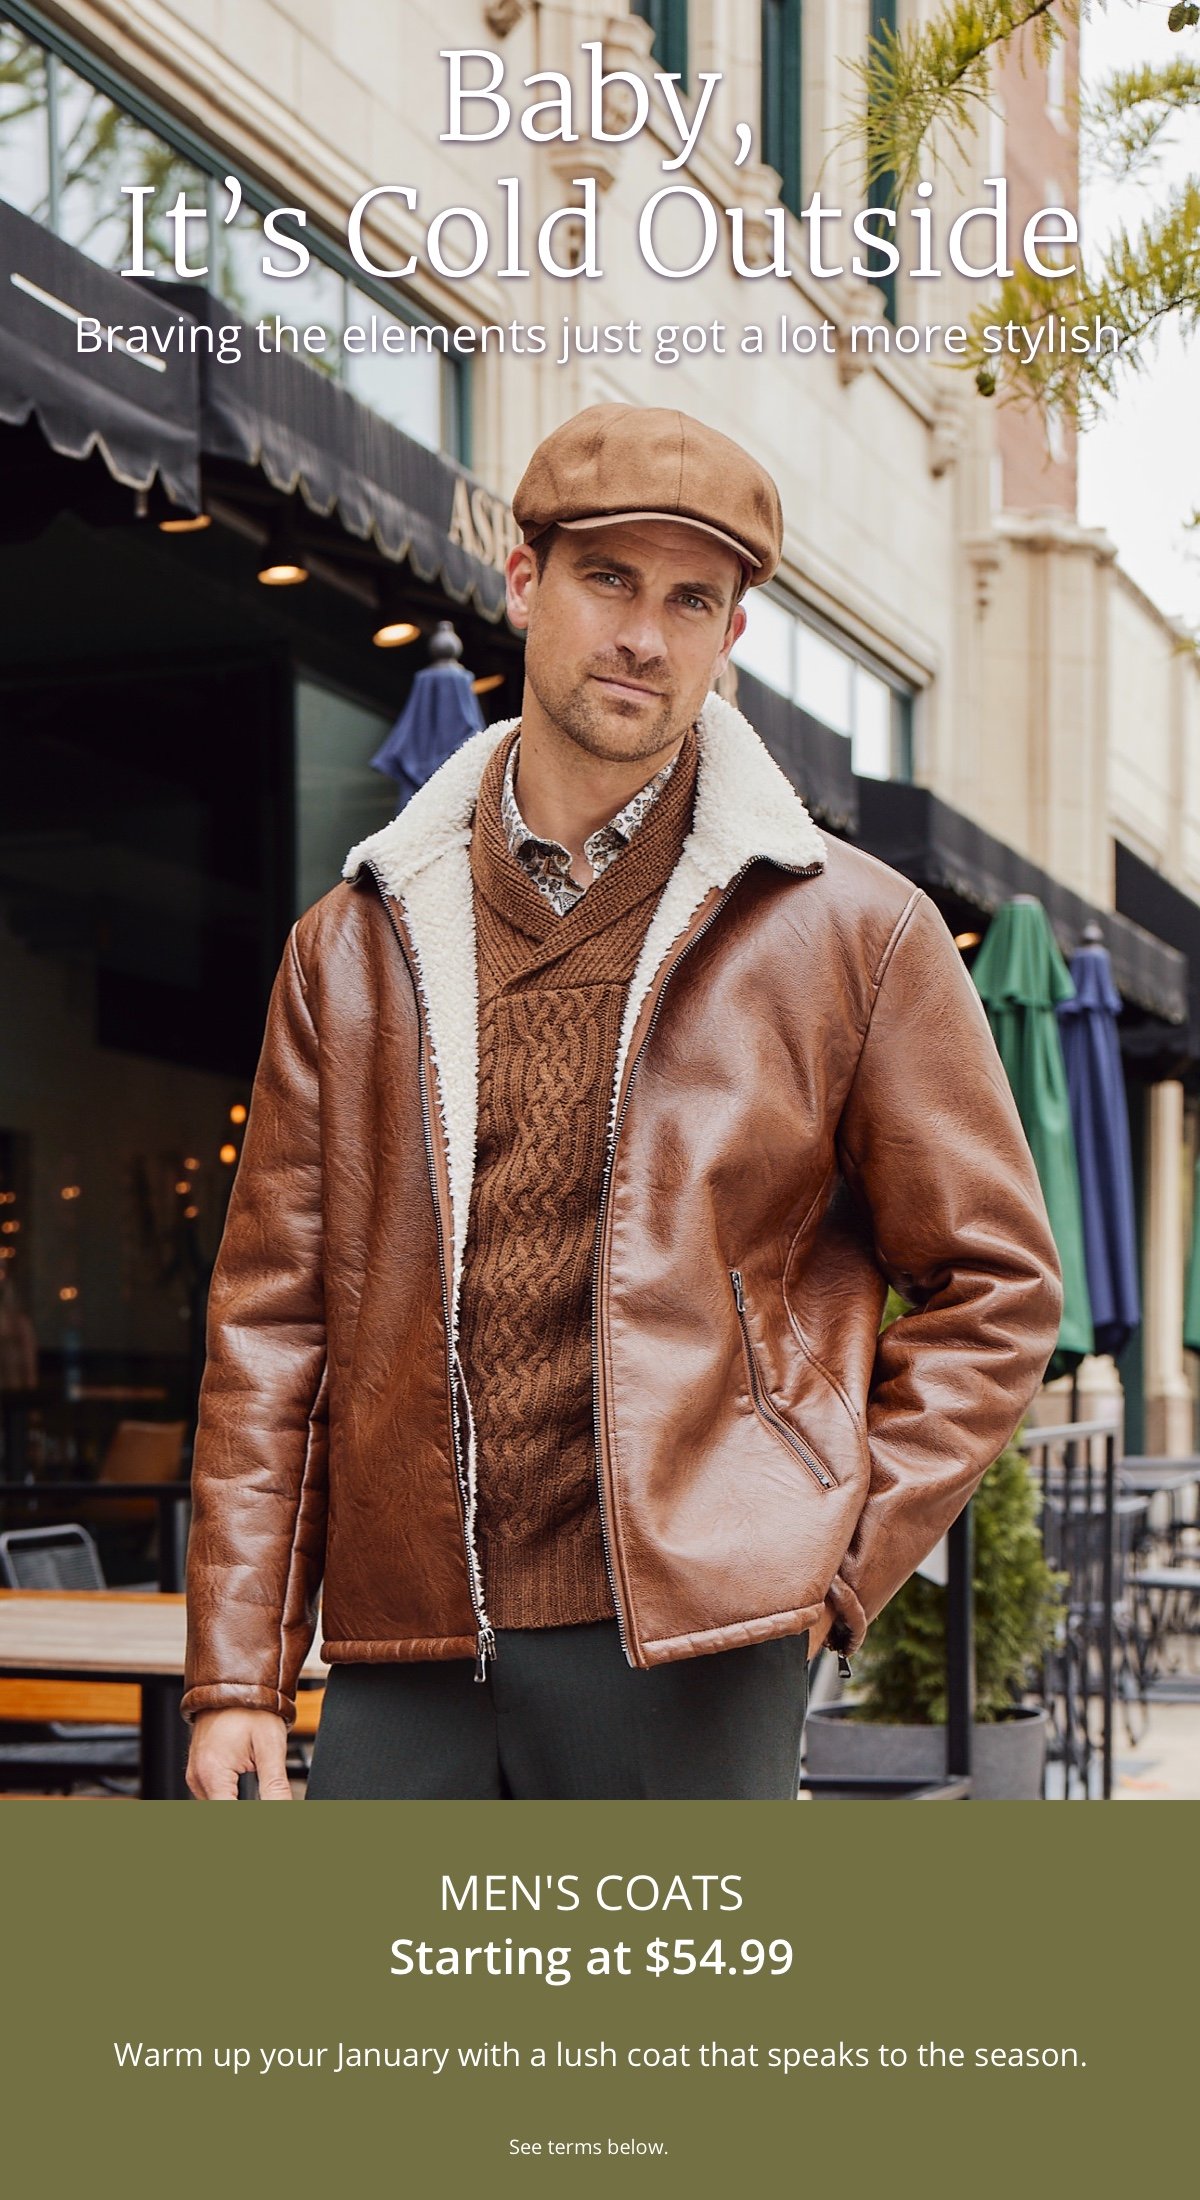 Baby, It s Cold Outside | Braving the elements just got a lot more stylish | Men s Coats Starting at \\$54.99 | Warm up your January with a lush coat that speaks to the season. See terms below.